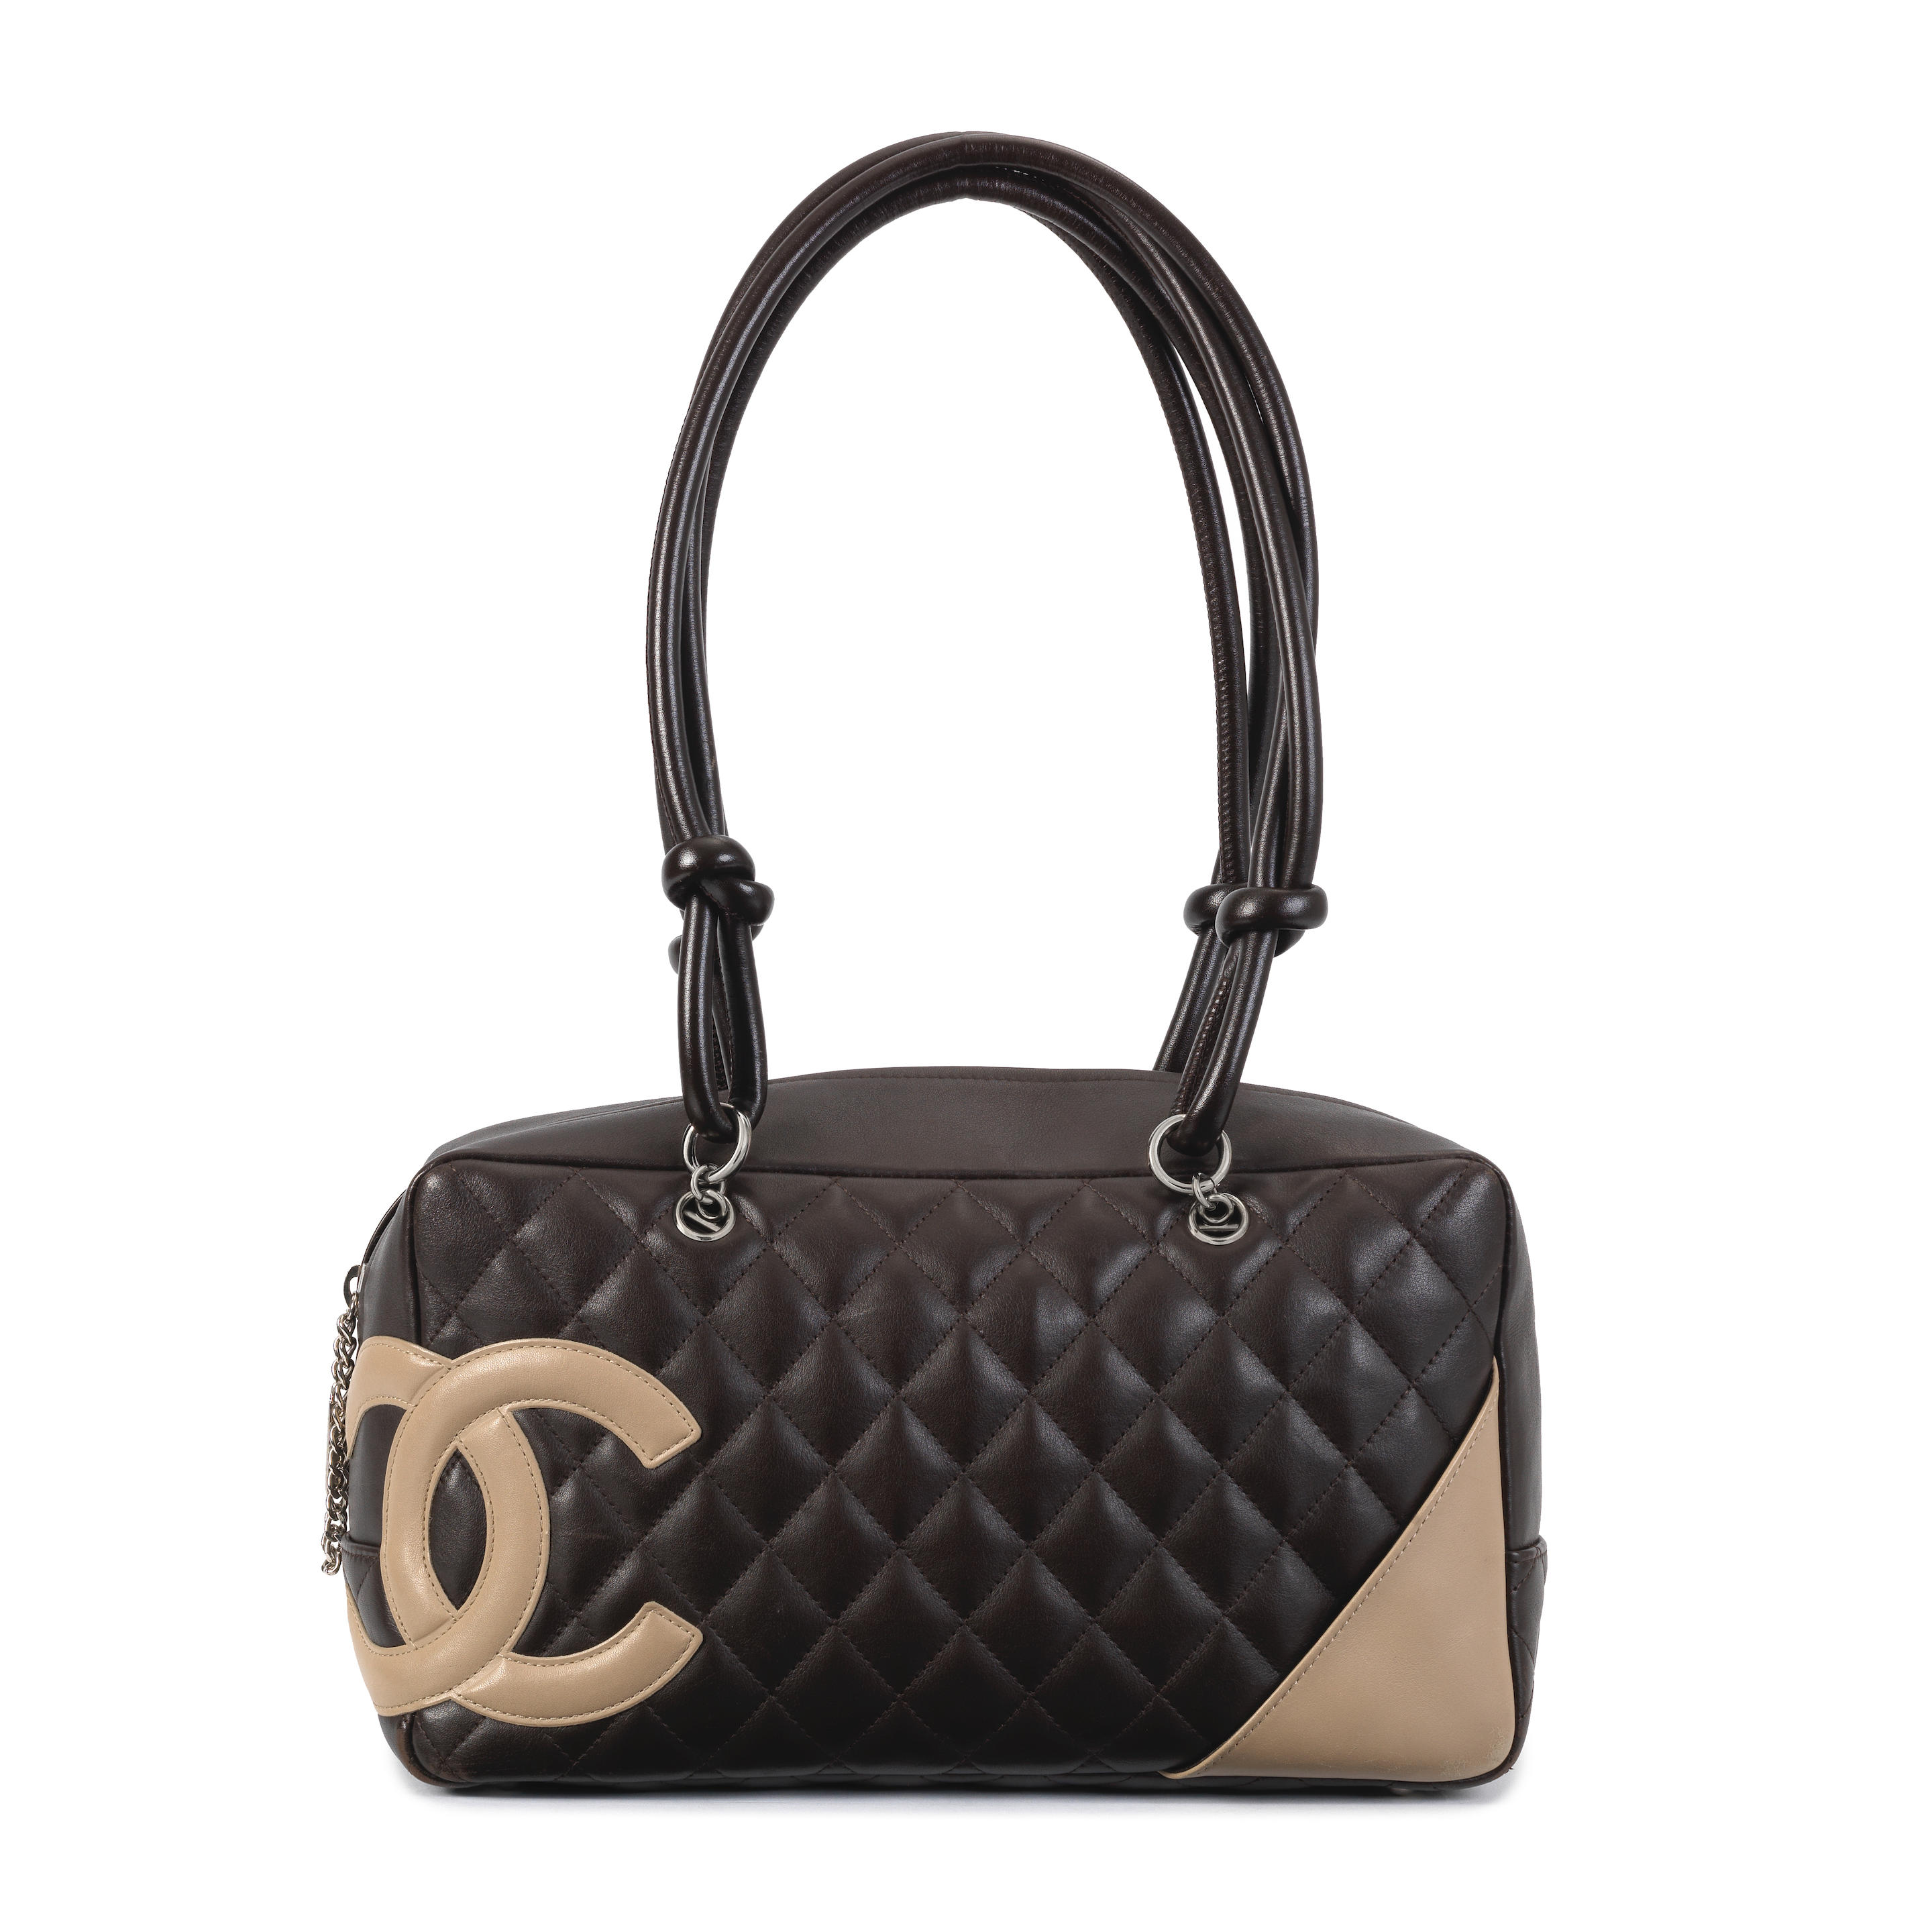 Bonhams : Karl Lagerfeld for Chanel a Black Quilted Satin Camera Bag  1994-96 (includes serial sticker and dust bag)